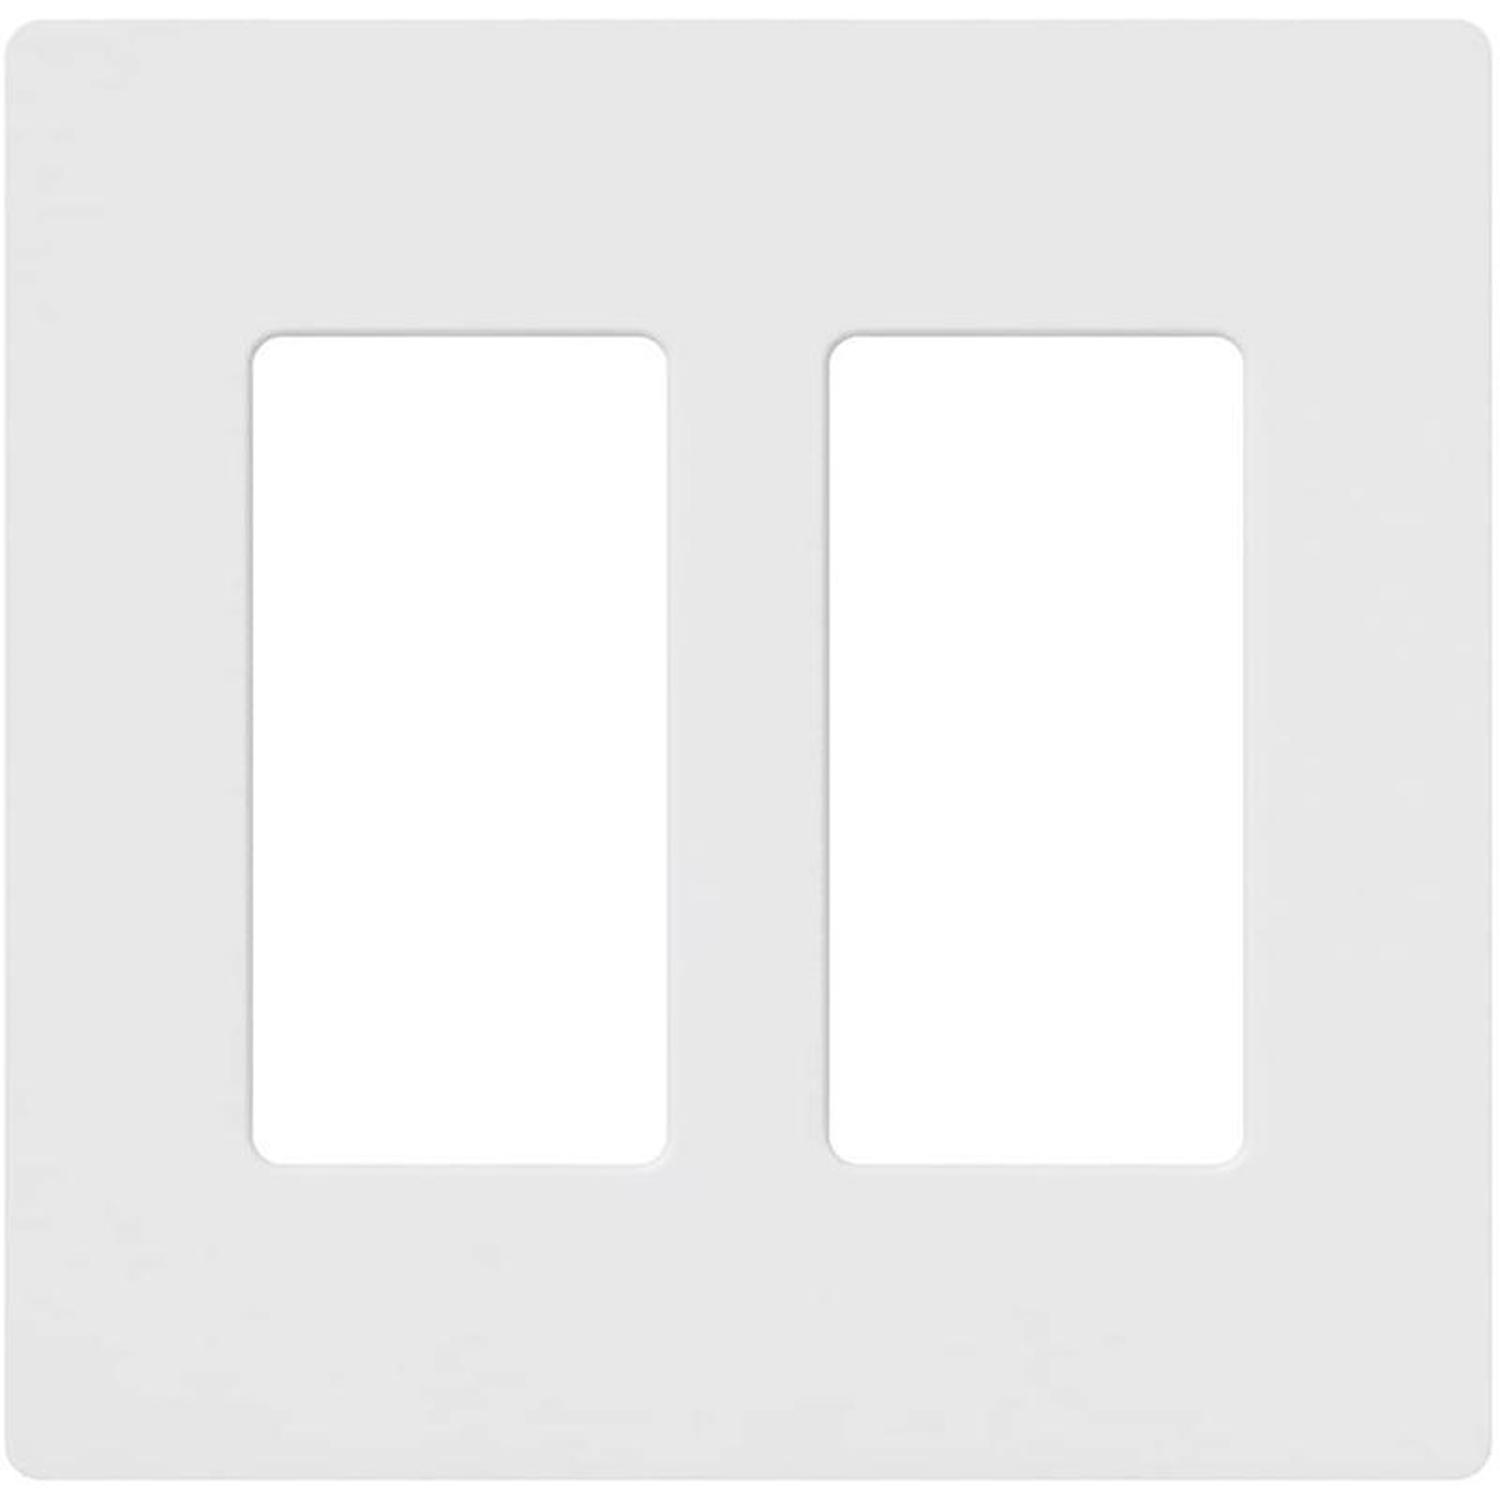 Photos - Household Switch Lutron Claro White 2 gang Plastic Decorator Wall Plate 1 pk CW-2-WH 